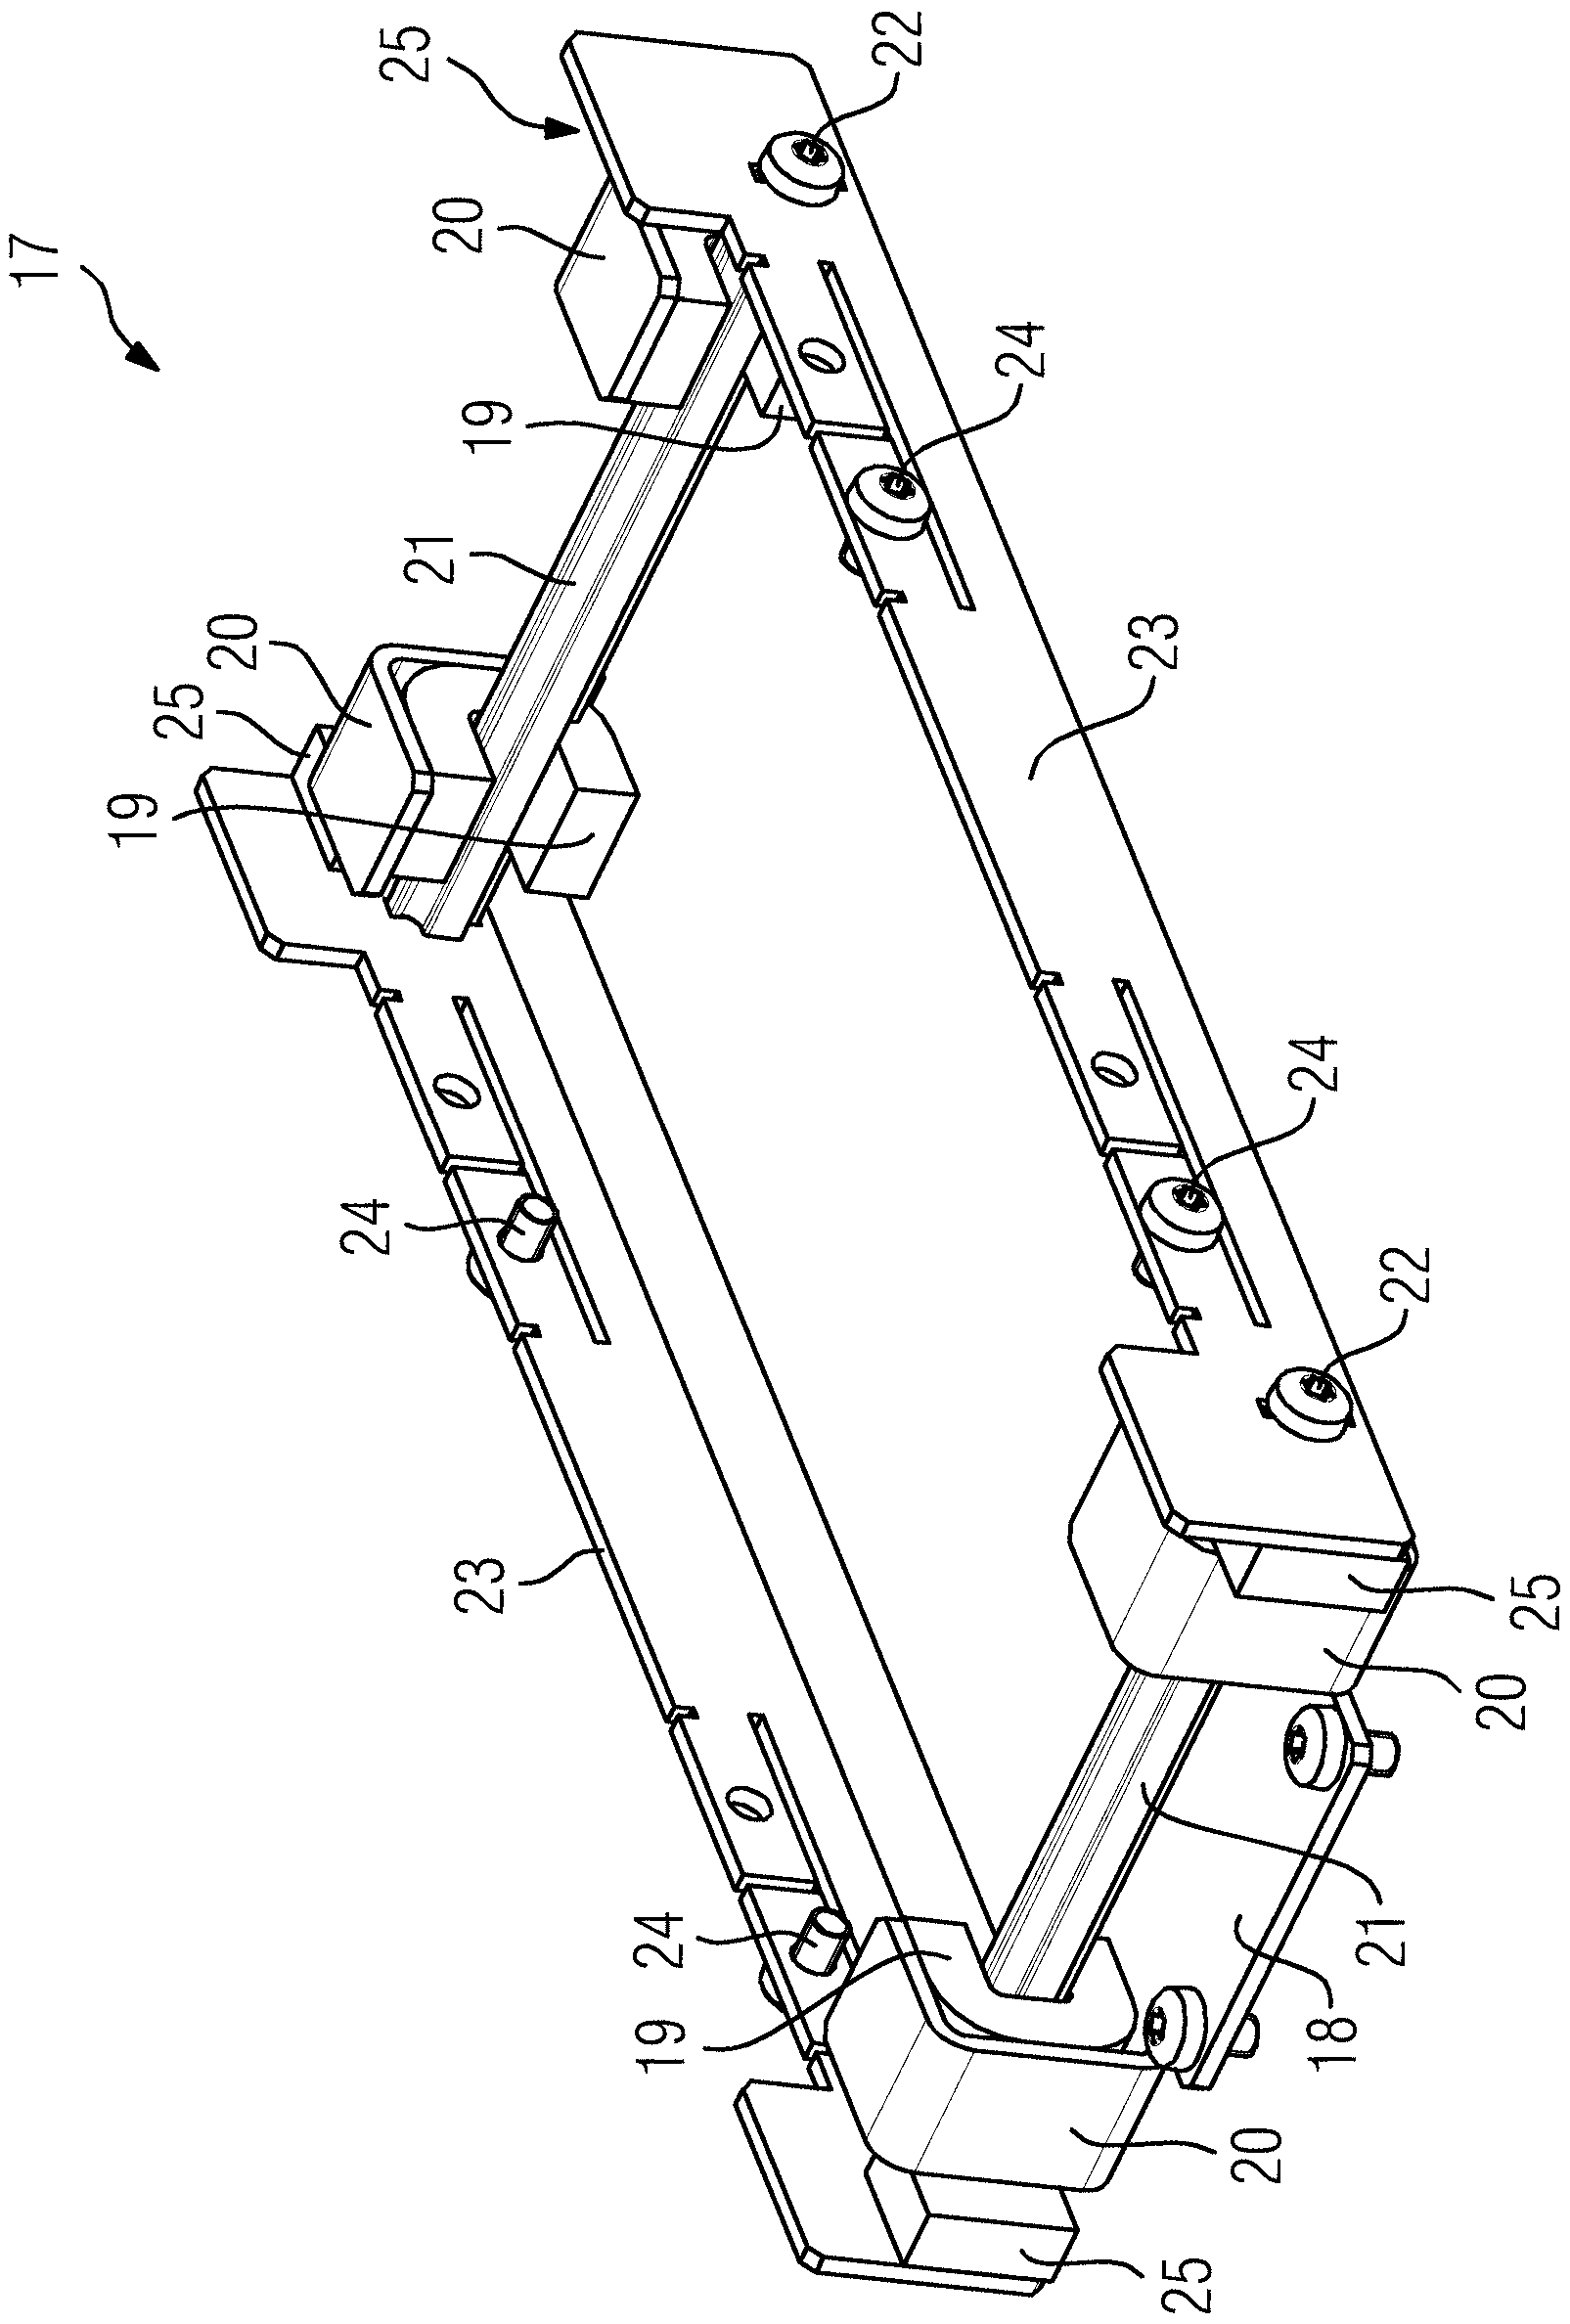 Holder for storing and holding an oscillation and/or shock-sensitive component